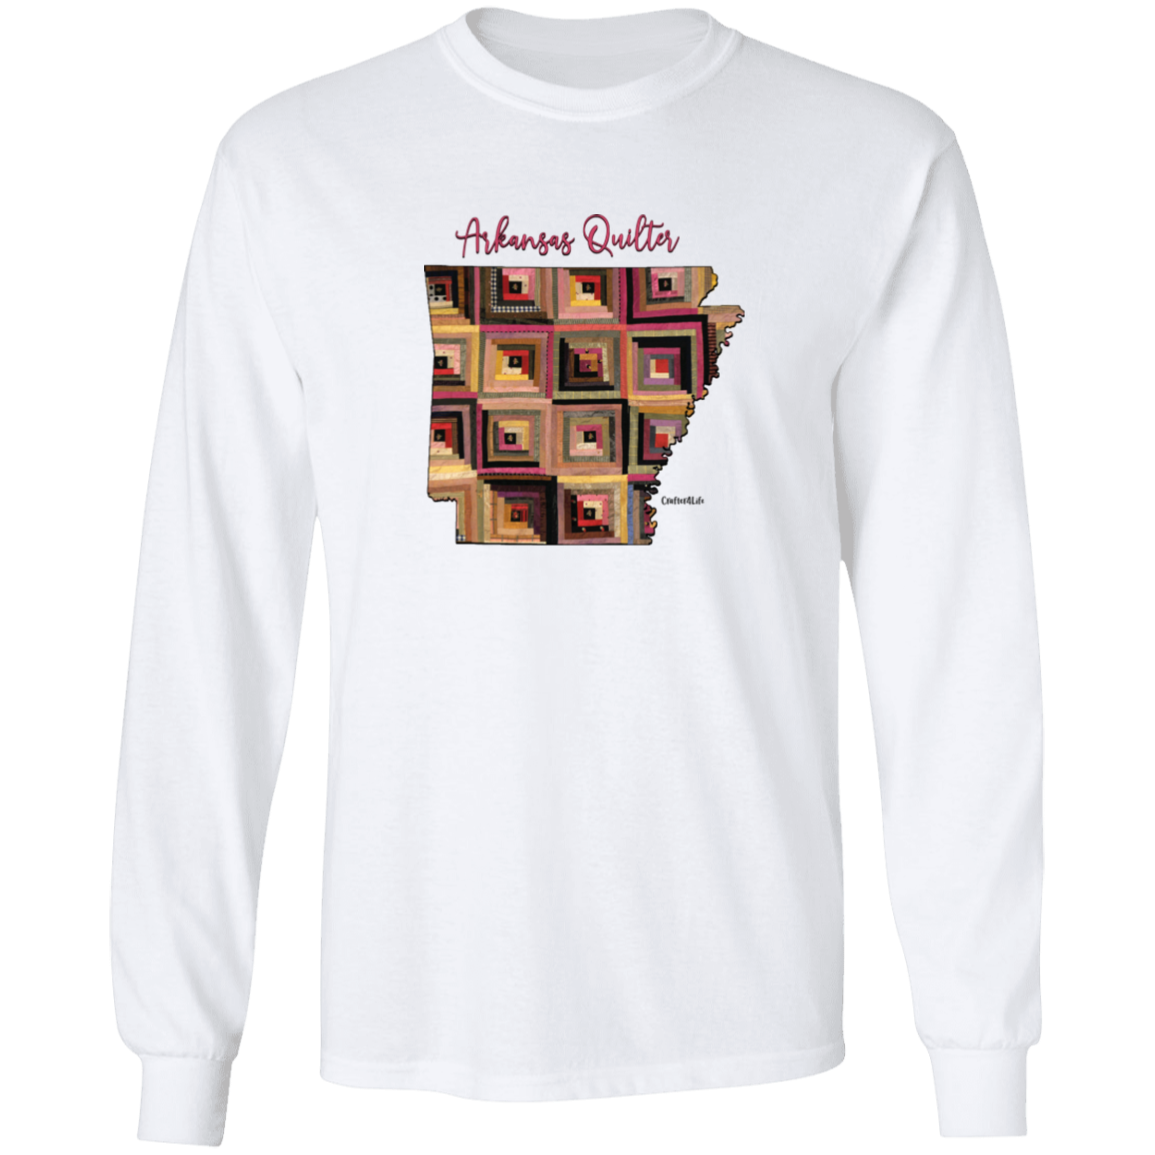 Arkansas Quilter Long Sleeve T-Shirt, Gift for Quilting Friends and Family